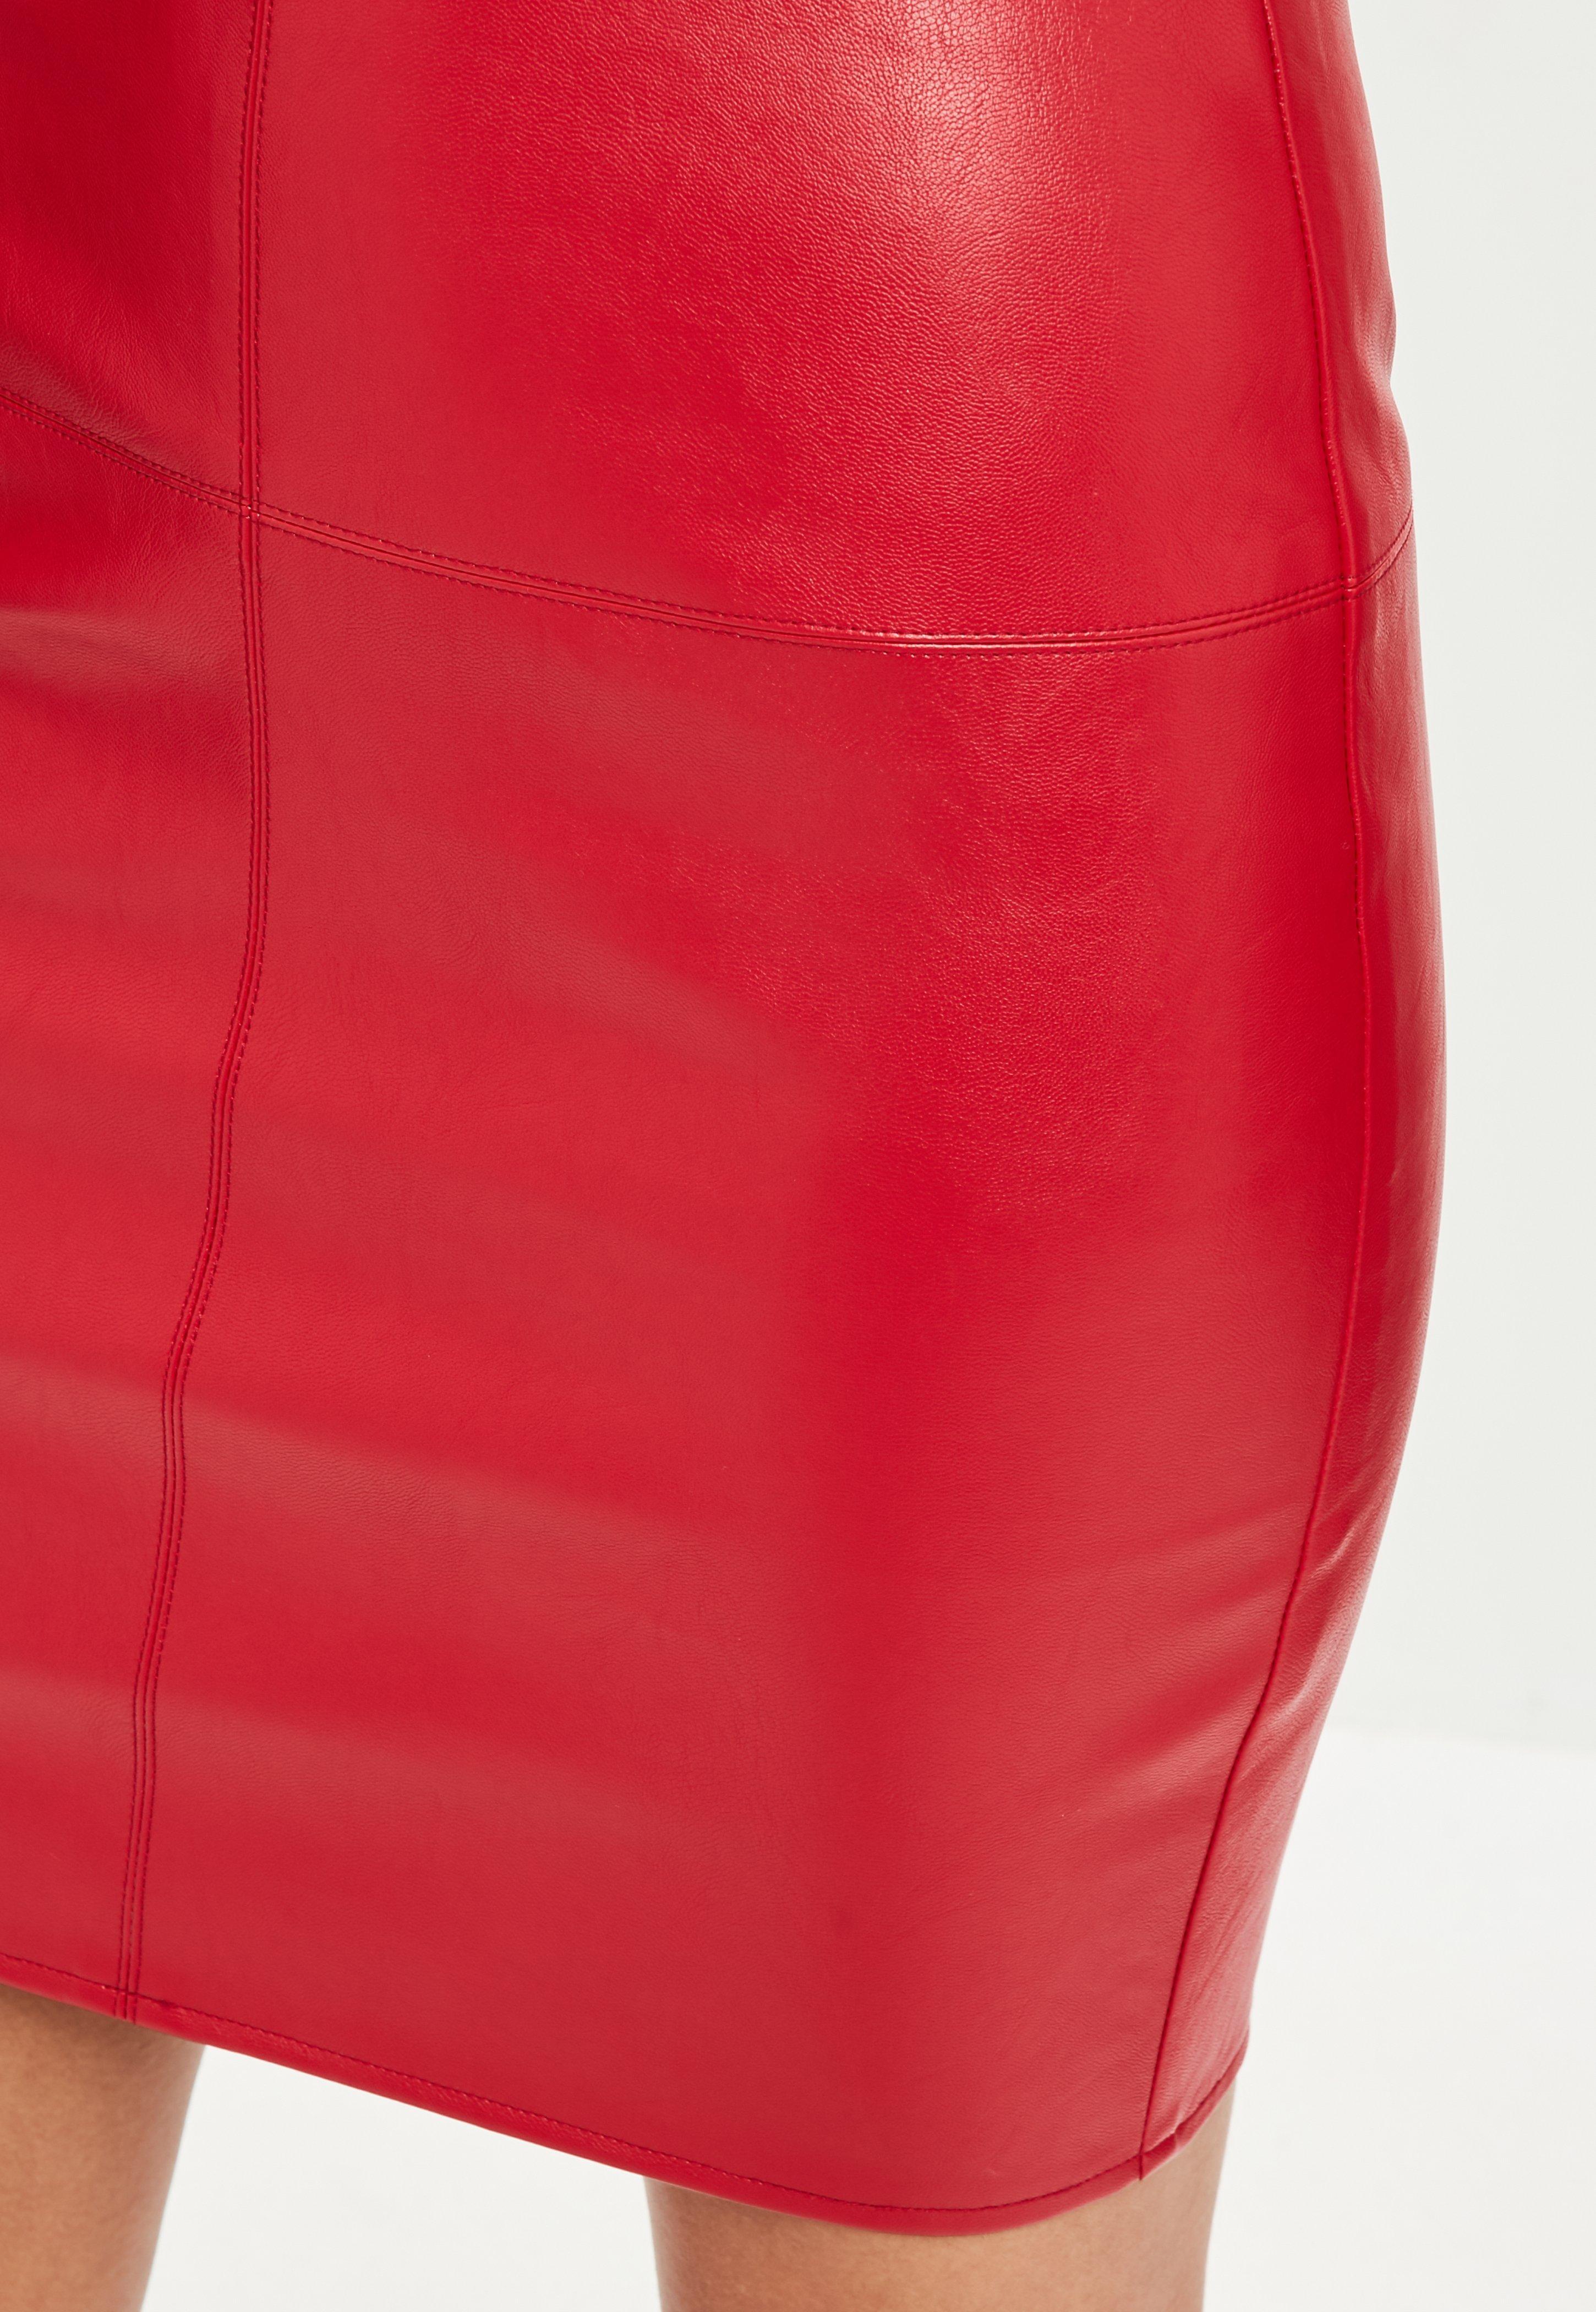 Lyst - Missguided Tall Red Faux Leather Skirt in Red